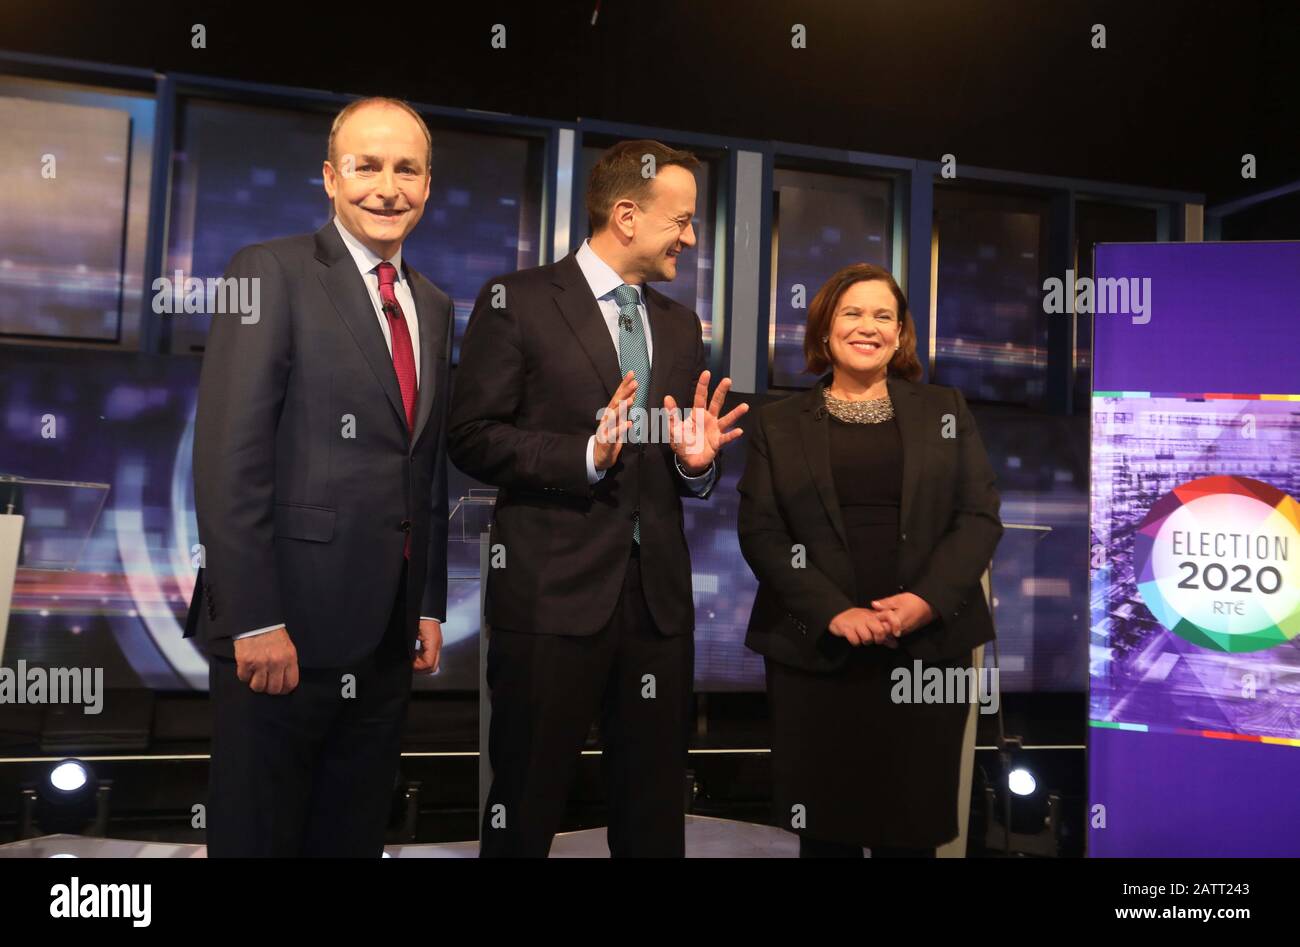 Dublin, Ireland. 4th Jan 2020. RTÉ Prime Time Leaders Debate. Pictured are (l to r) party leaders Micheal Martin TD of Fianna Fail, Taoiseach Leo Varadkar TD of Fine Gael and Mary Lou McDonald TD of Sinn Fein in RTE on stage in Donnybrook this evening, as RTE prepares to broadcast the final live television leaders' debate of the Election 2020 campaign. Photograph: Leah Farrell / RollingNews.ie Credit: RollingNews.ie/Alamy Live News Credit: RollingNews.ie/Alamy Live News Stock Photo